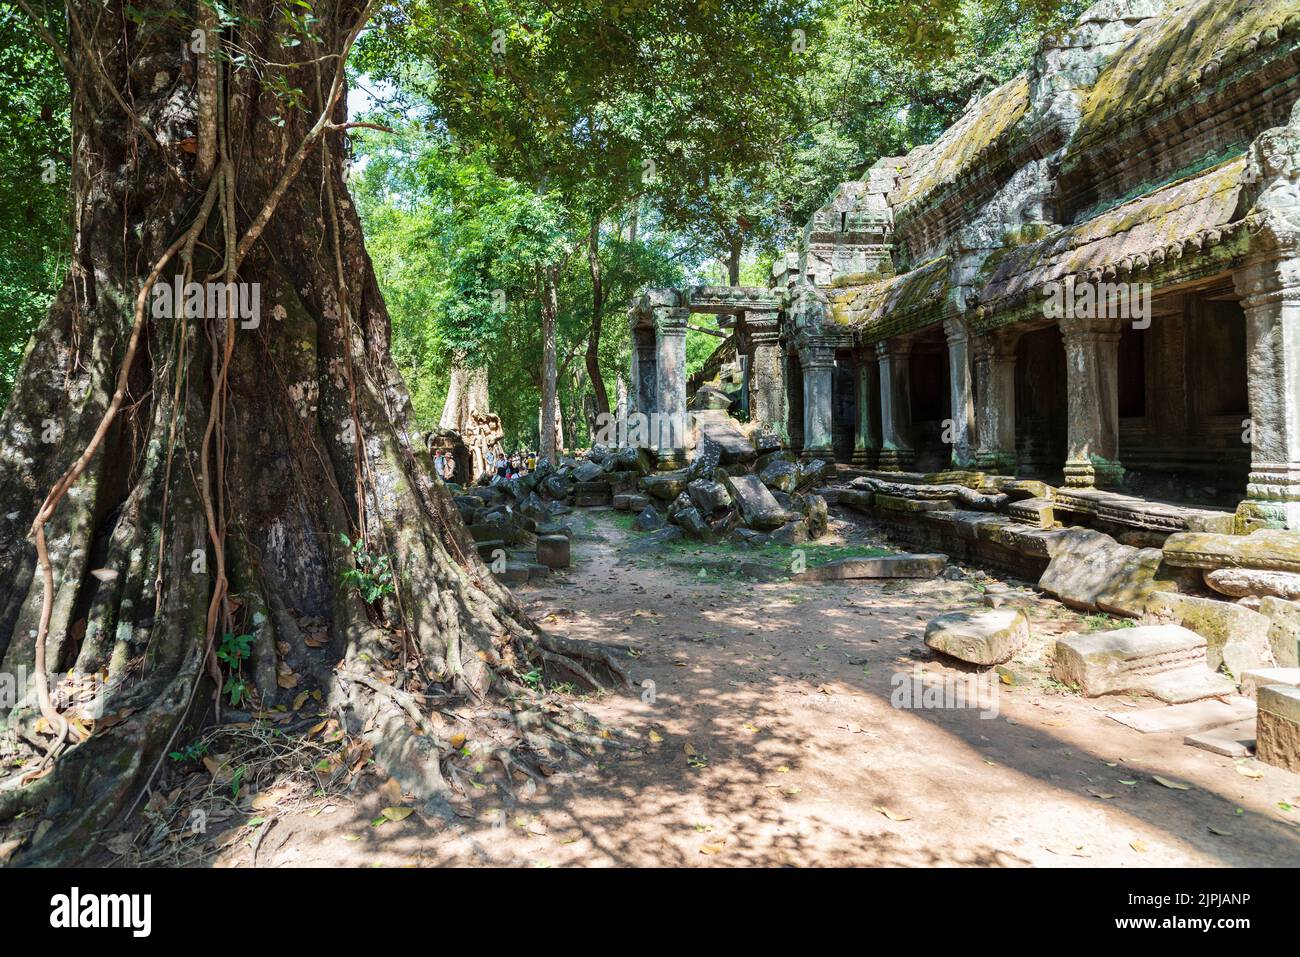 Angkor Wat Temple Complex. Siem Reap City is a historical touristy place in Cambodia. Visitors touring the temples. Stock Photo